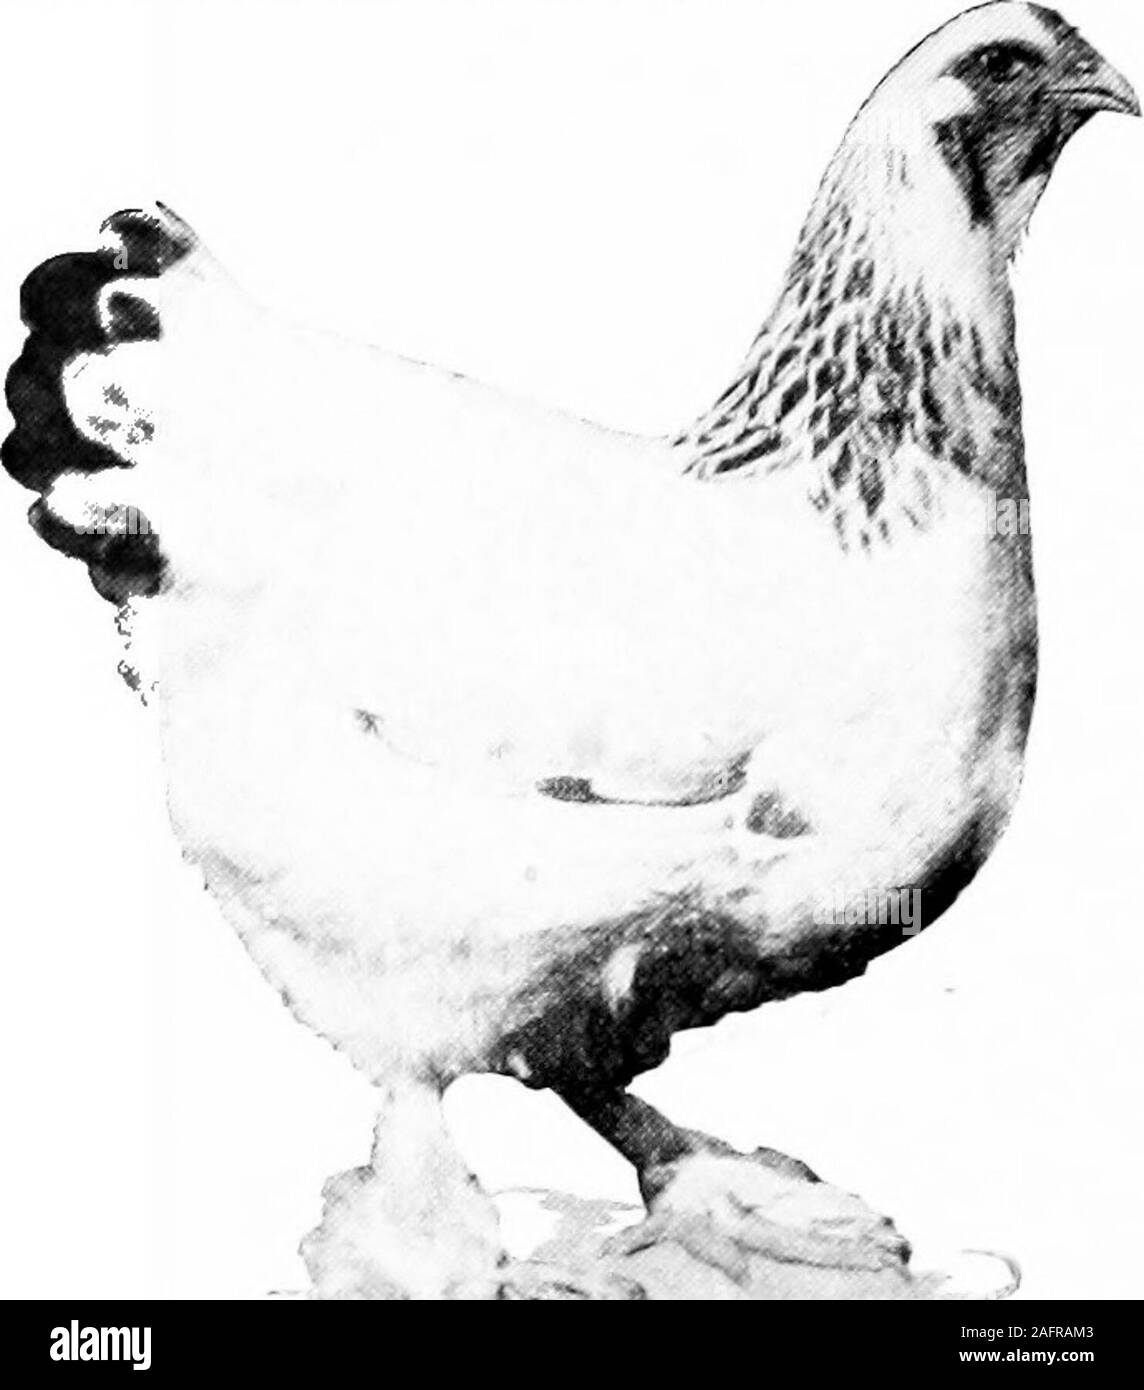 . Poultry for the farm and home. One of the representatives of thePurdue Barred Plymouth Rock flock.In the egg-laying contests the recordsmade by the general-purpose breedscompare favorably with the recordsmade by the egg breeds. prefer white eggs for table use. U. R. Fishel of Hope, Indiana, owns this attractive flock ofWhite Wyandottes. 67 MEAT BREEDS The meat breeds originated in Asia. Ttie Brahmas, Cochinsand Langshans are the chief members of this class. They are noted fortheir unusual size andgentle disposition, theymove slowly and are poorforagers. They maturelate and are persistentbroo Stock Photo